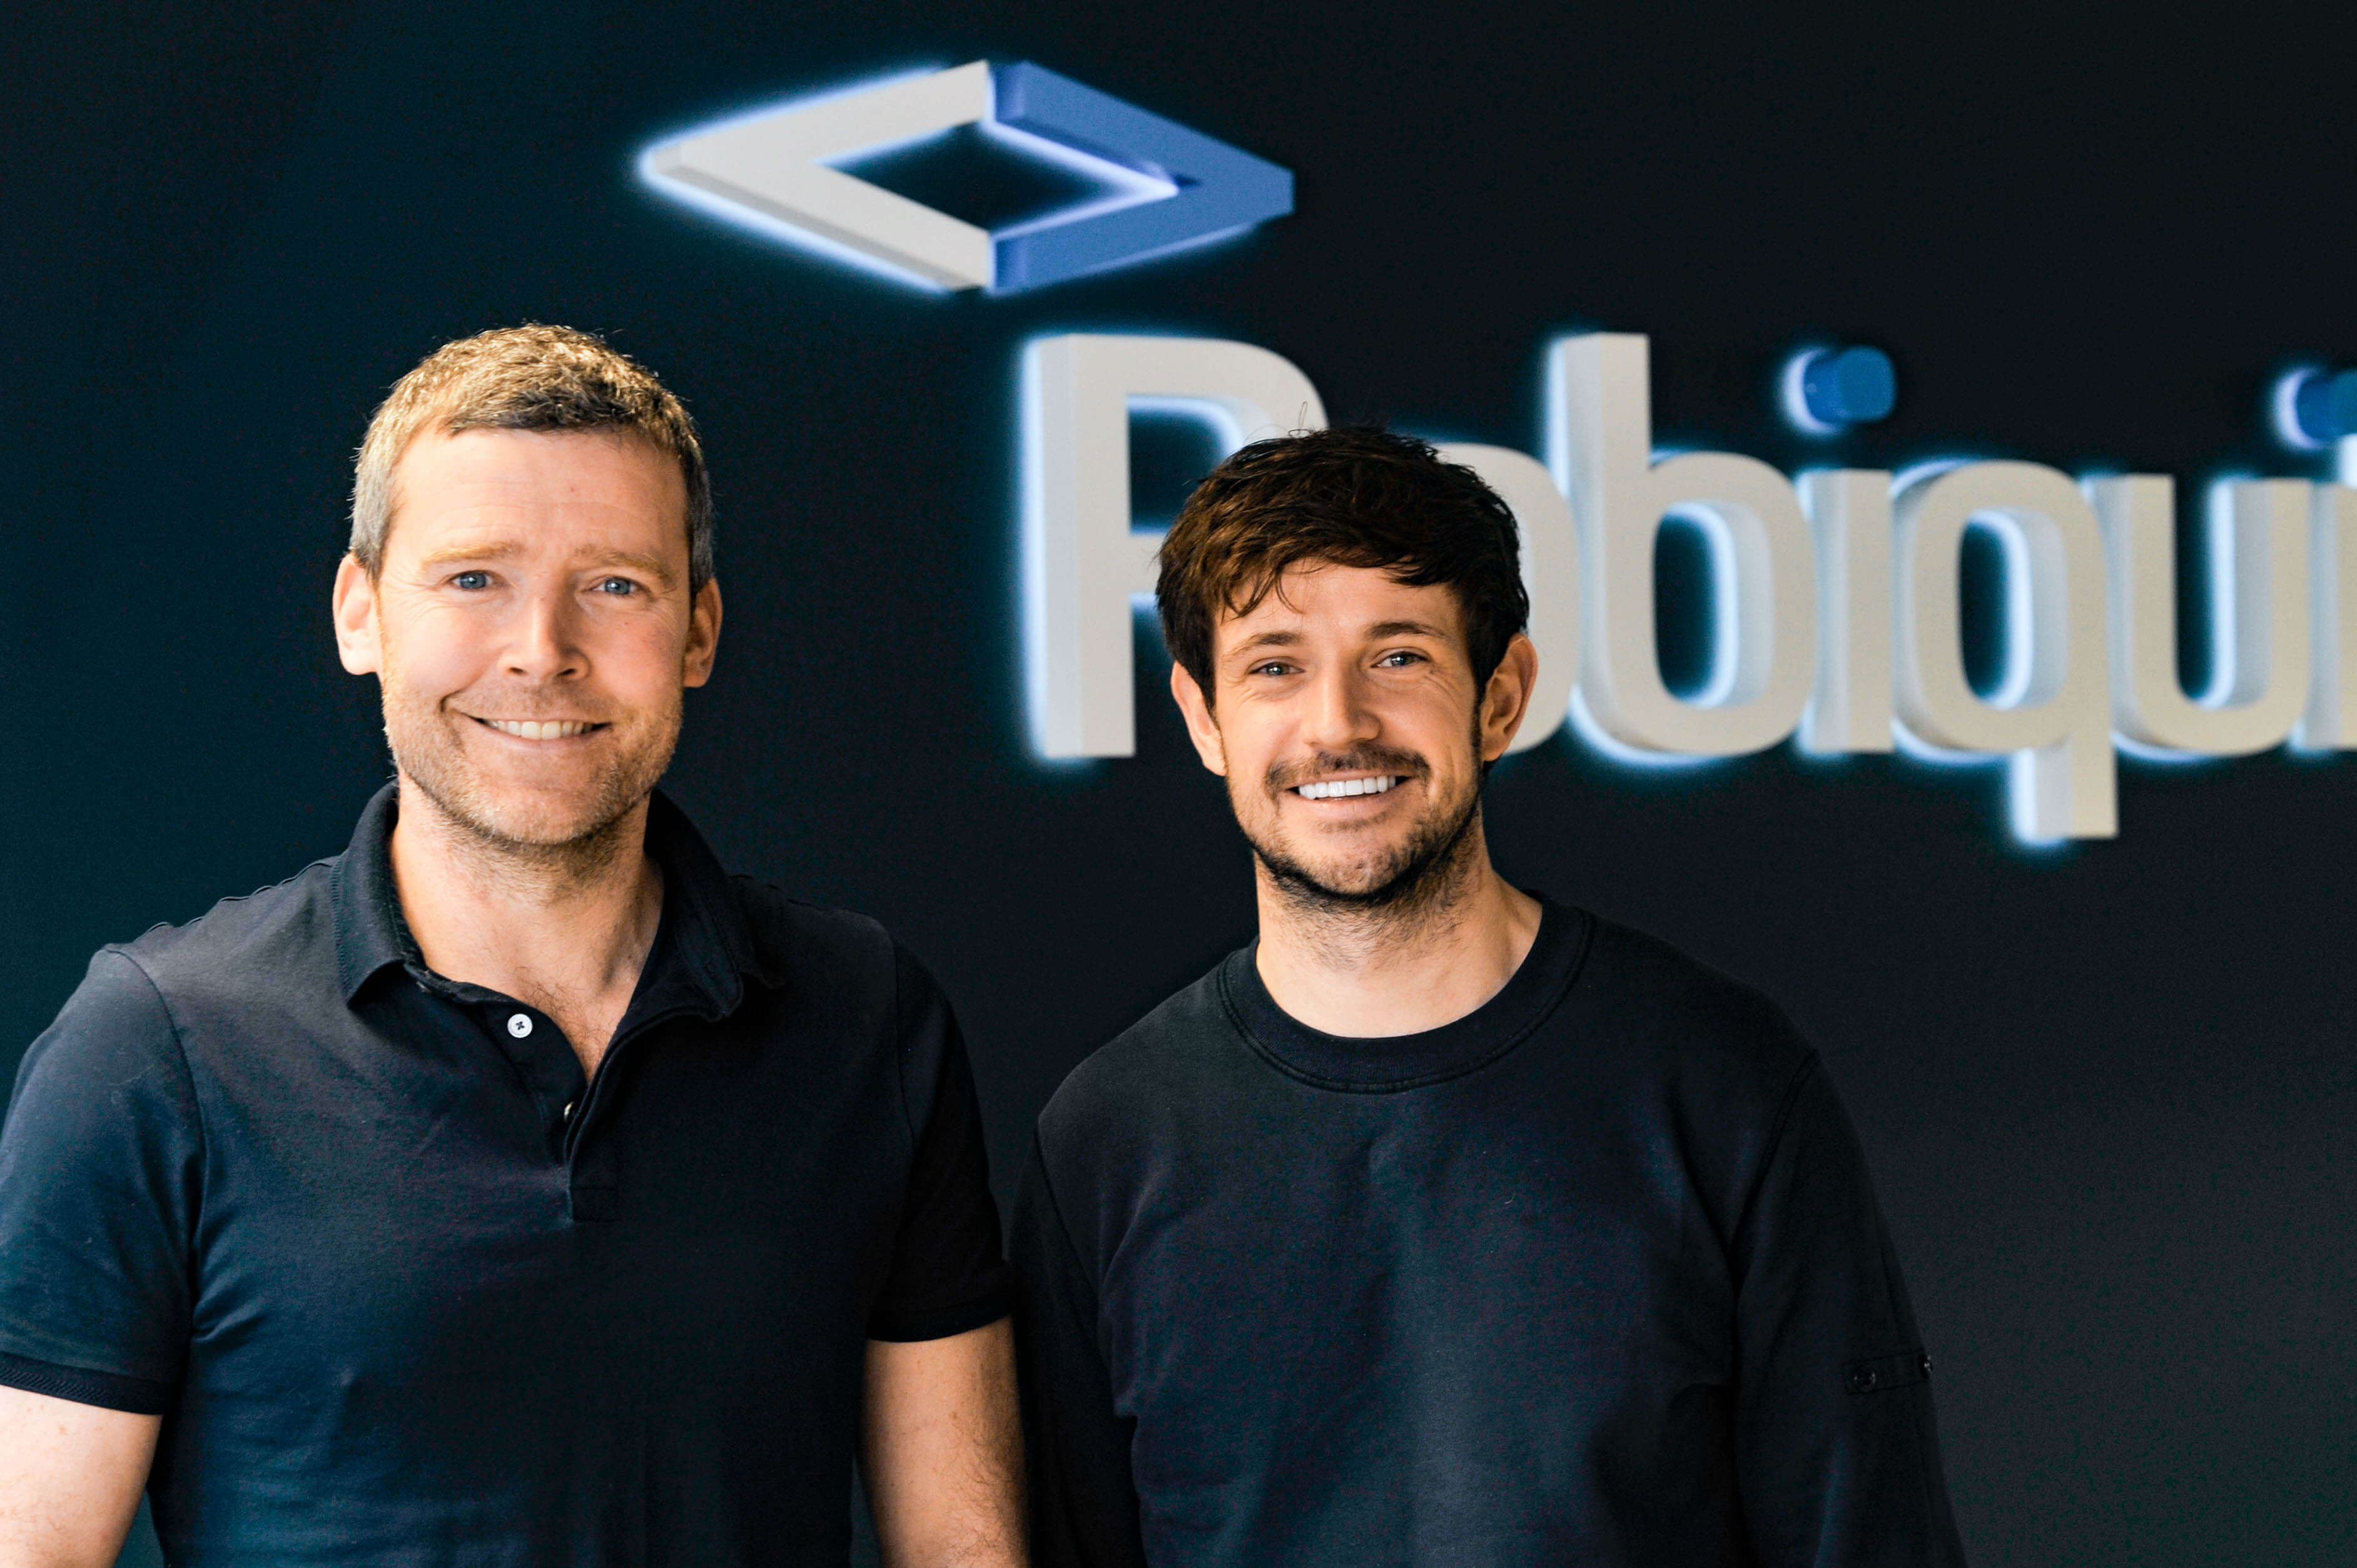 Robiquity CEO Tom Davies (left) and Co-Founder Jack Rimmer